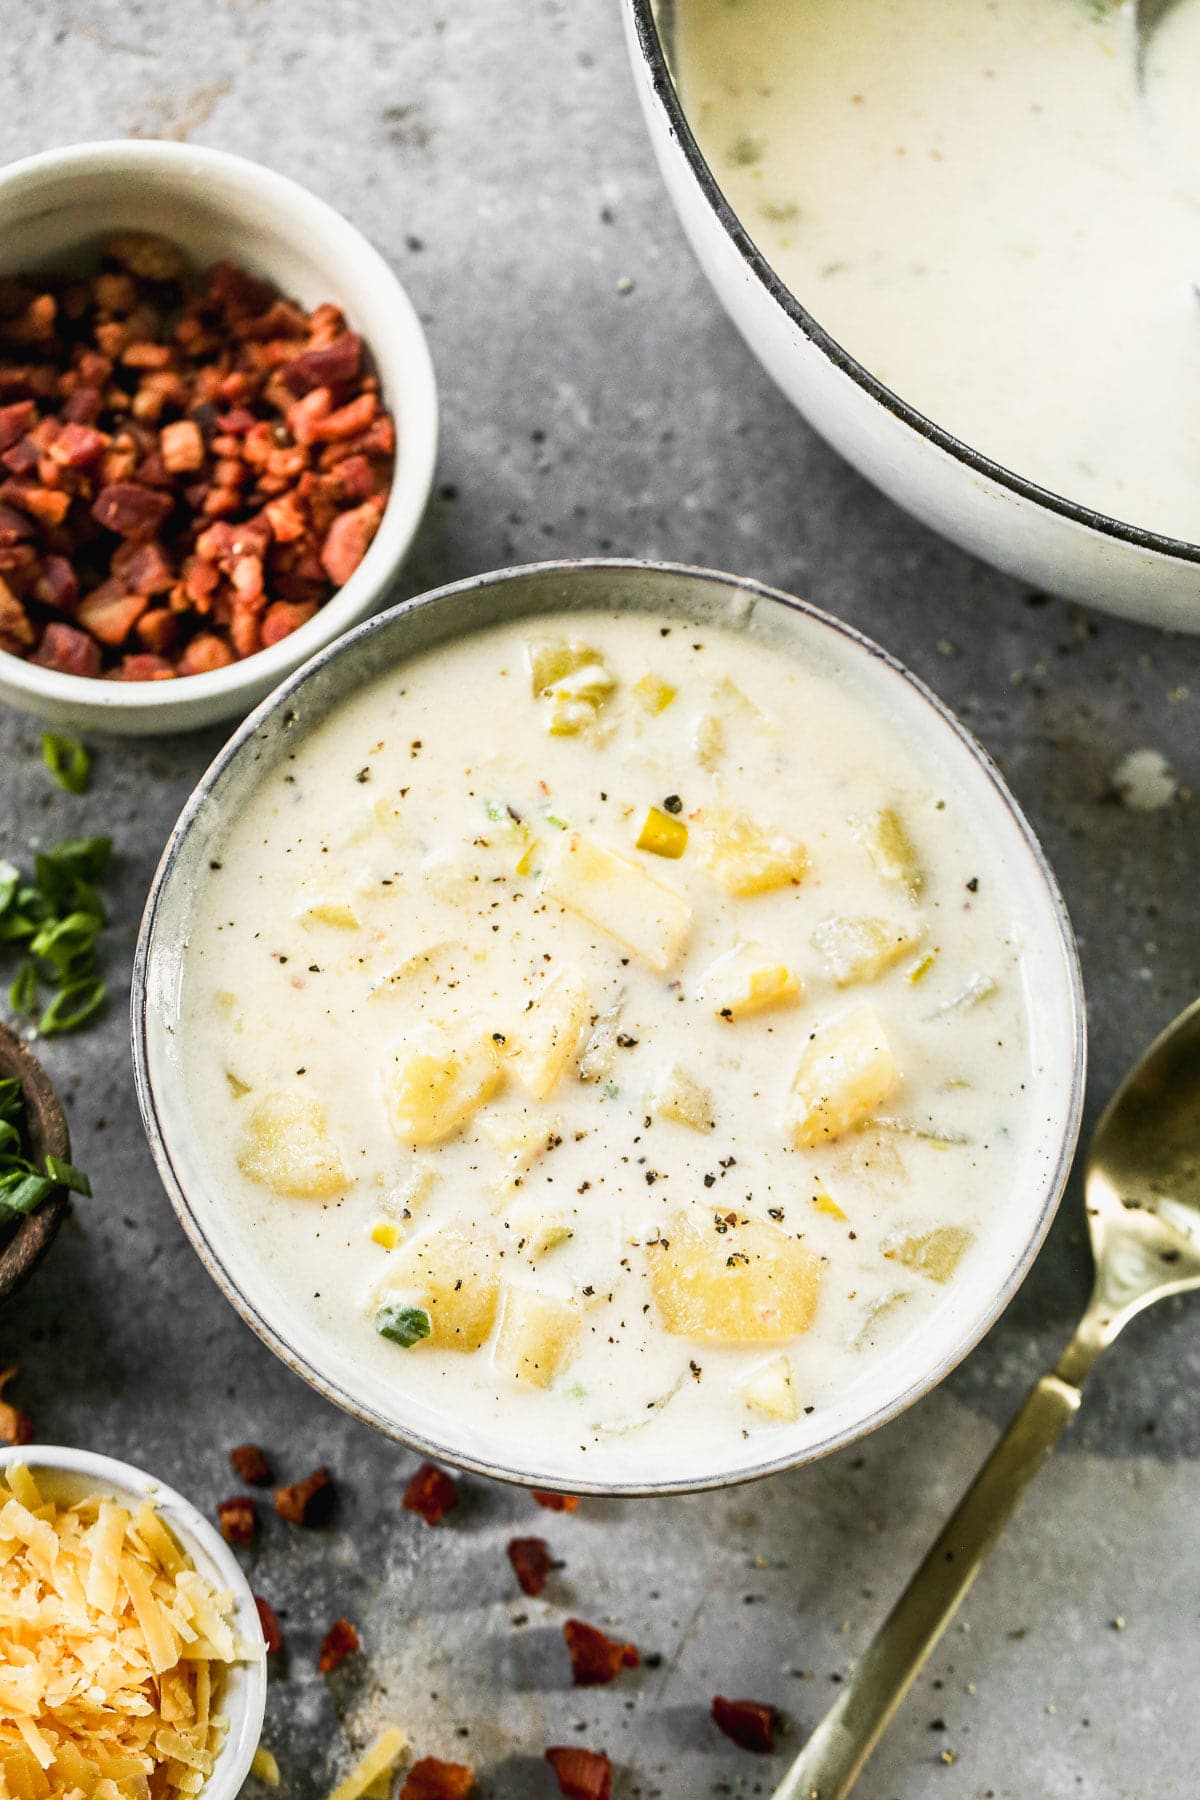 With many of the same notes as the classic, Cheesy Potato Soup is basically an elevated version of classic baked potato soup but BETTER. We swap out cheddar for aged gouda, throw in sweet leeks, tangy crème fraîche and salty pancetta for an updated version we're obsessed with.